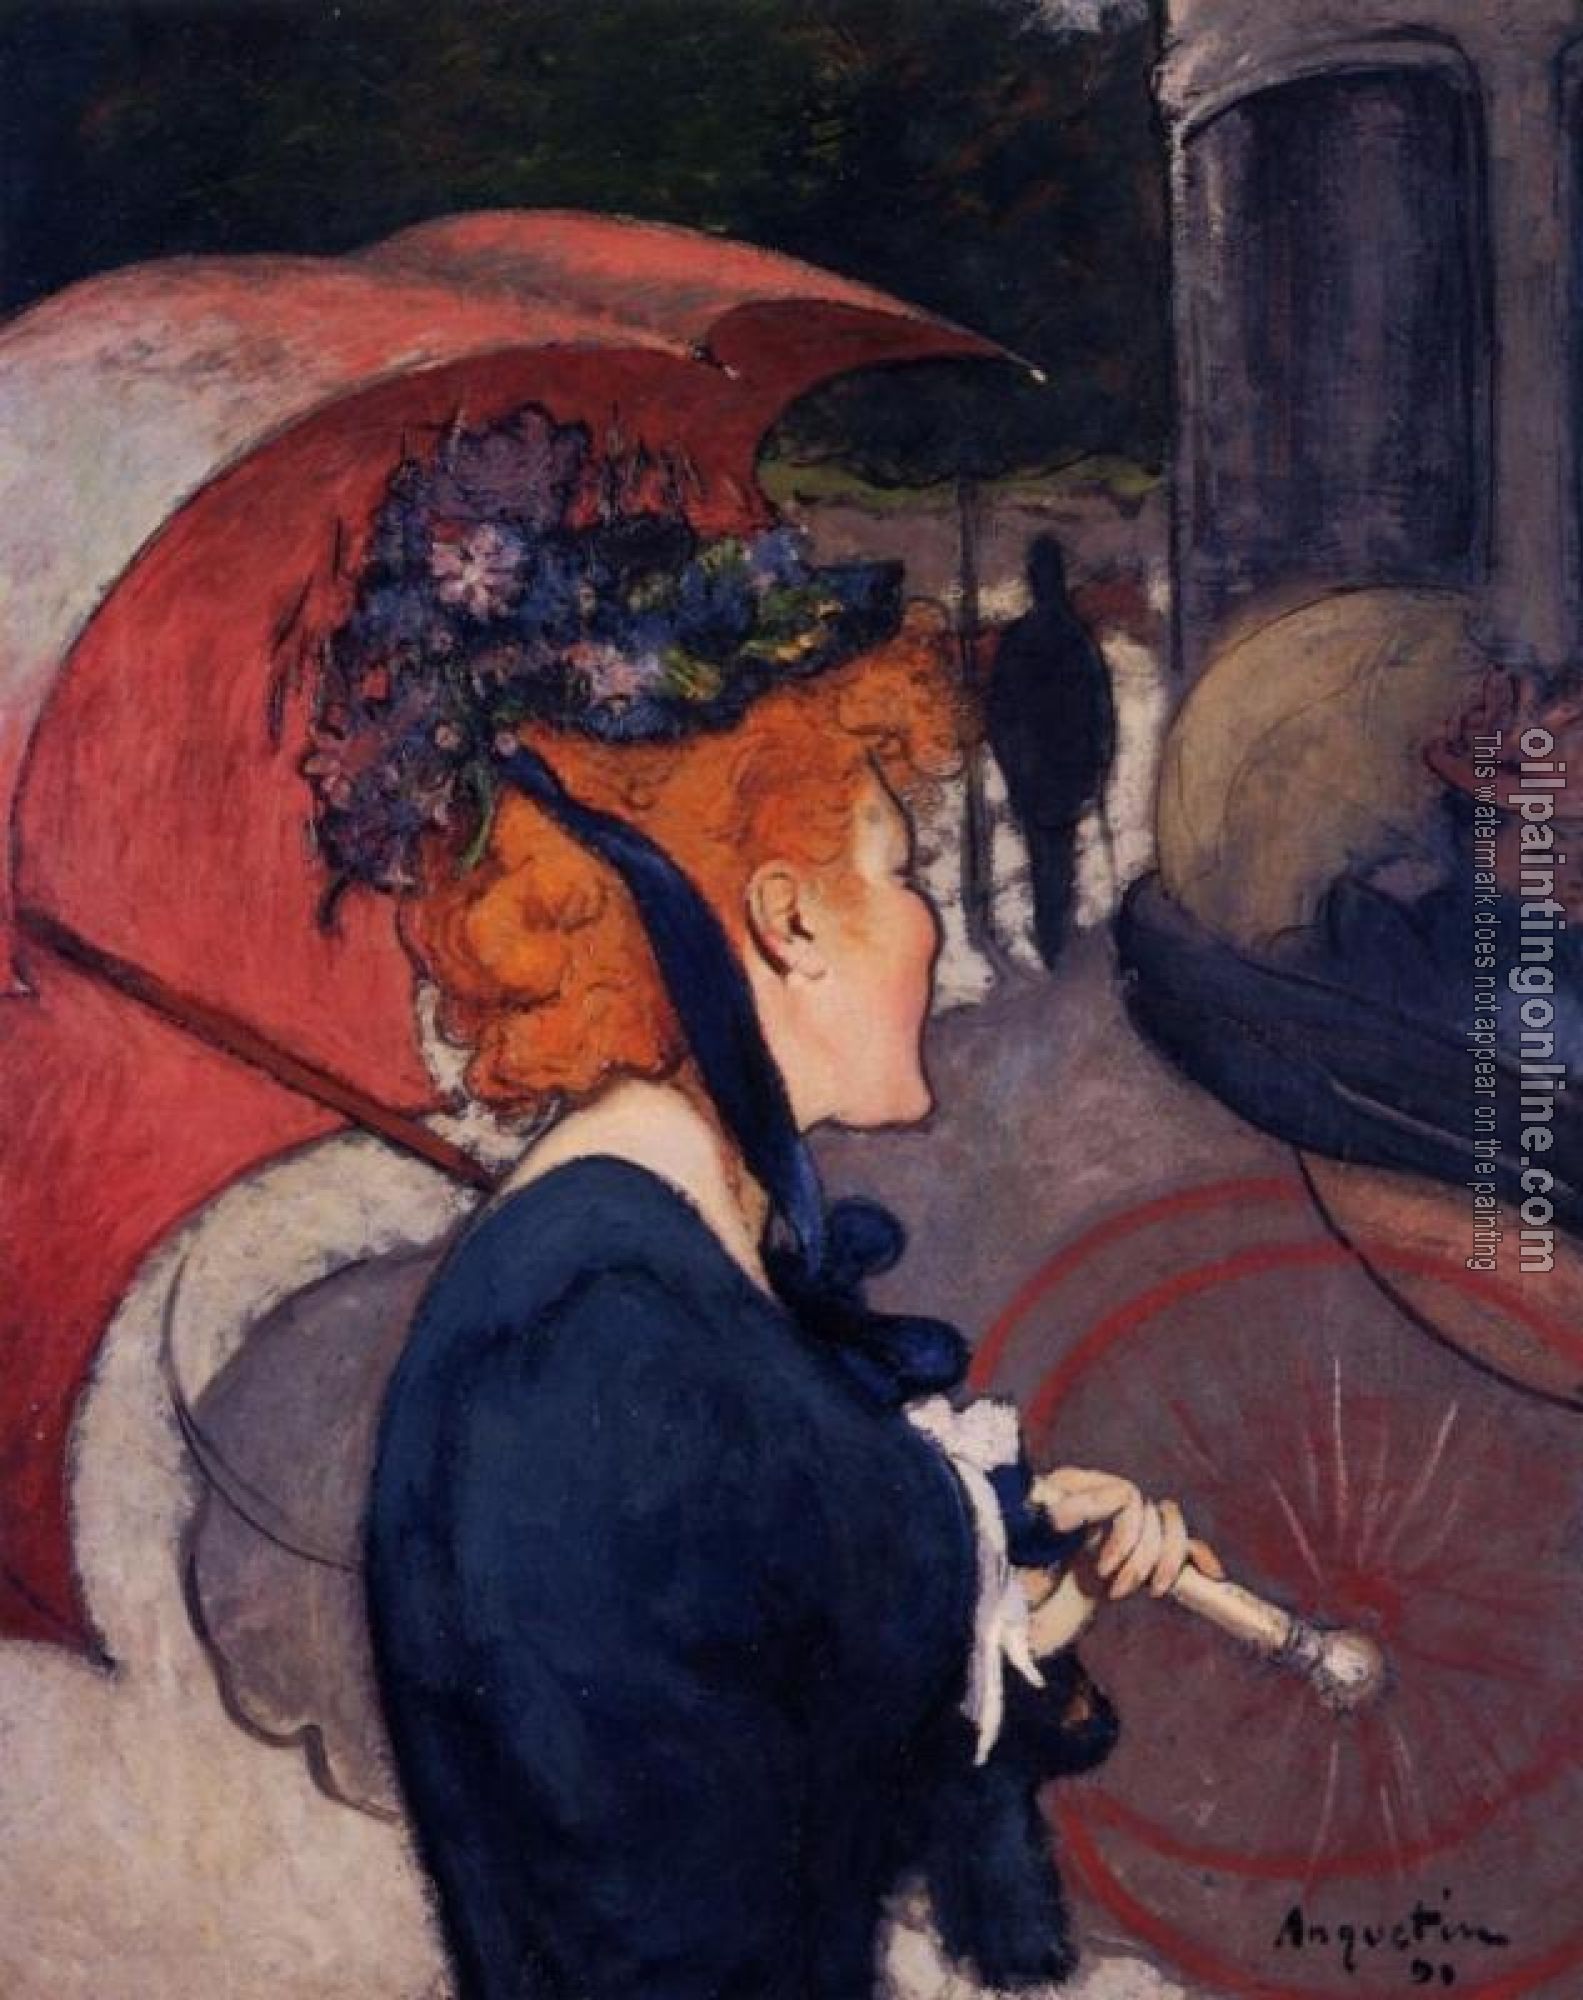 Anquetin, Louis - Woman with Umbrella